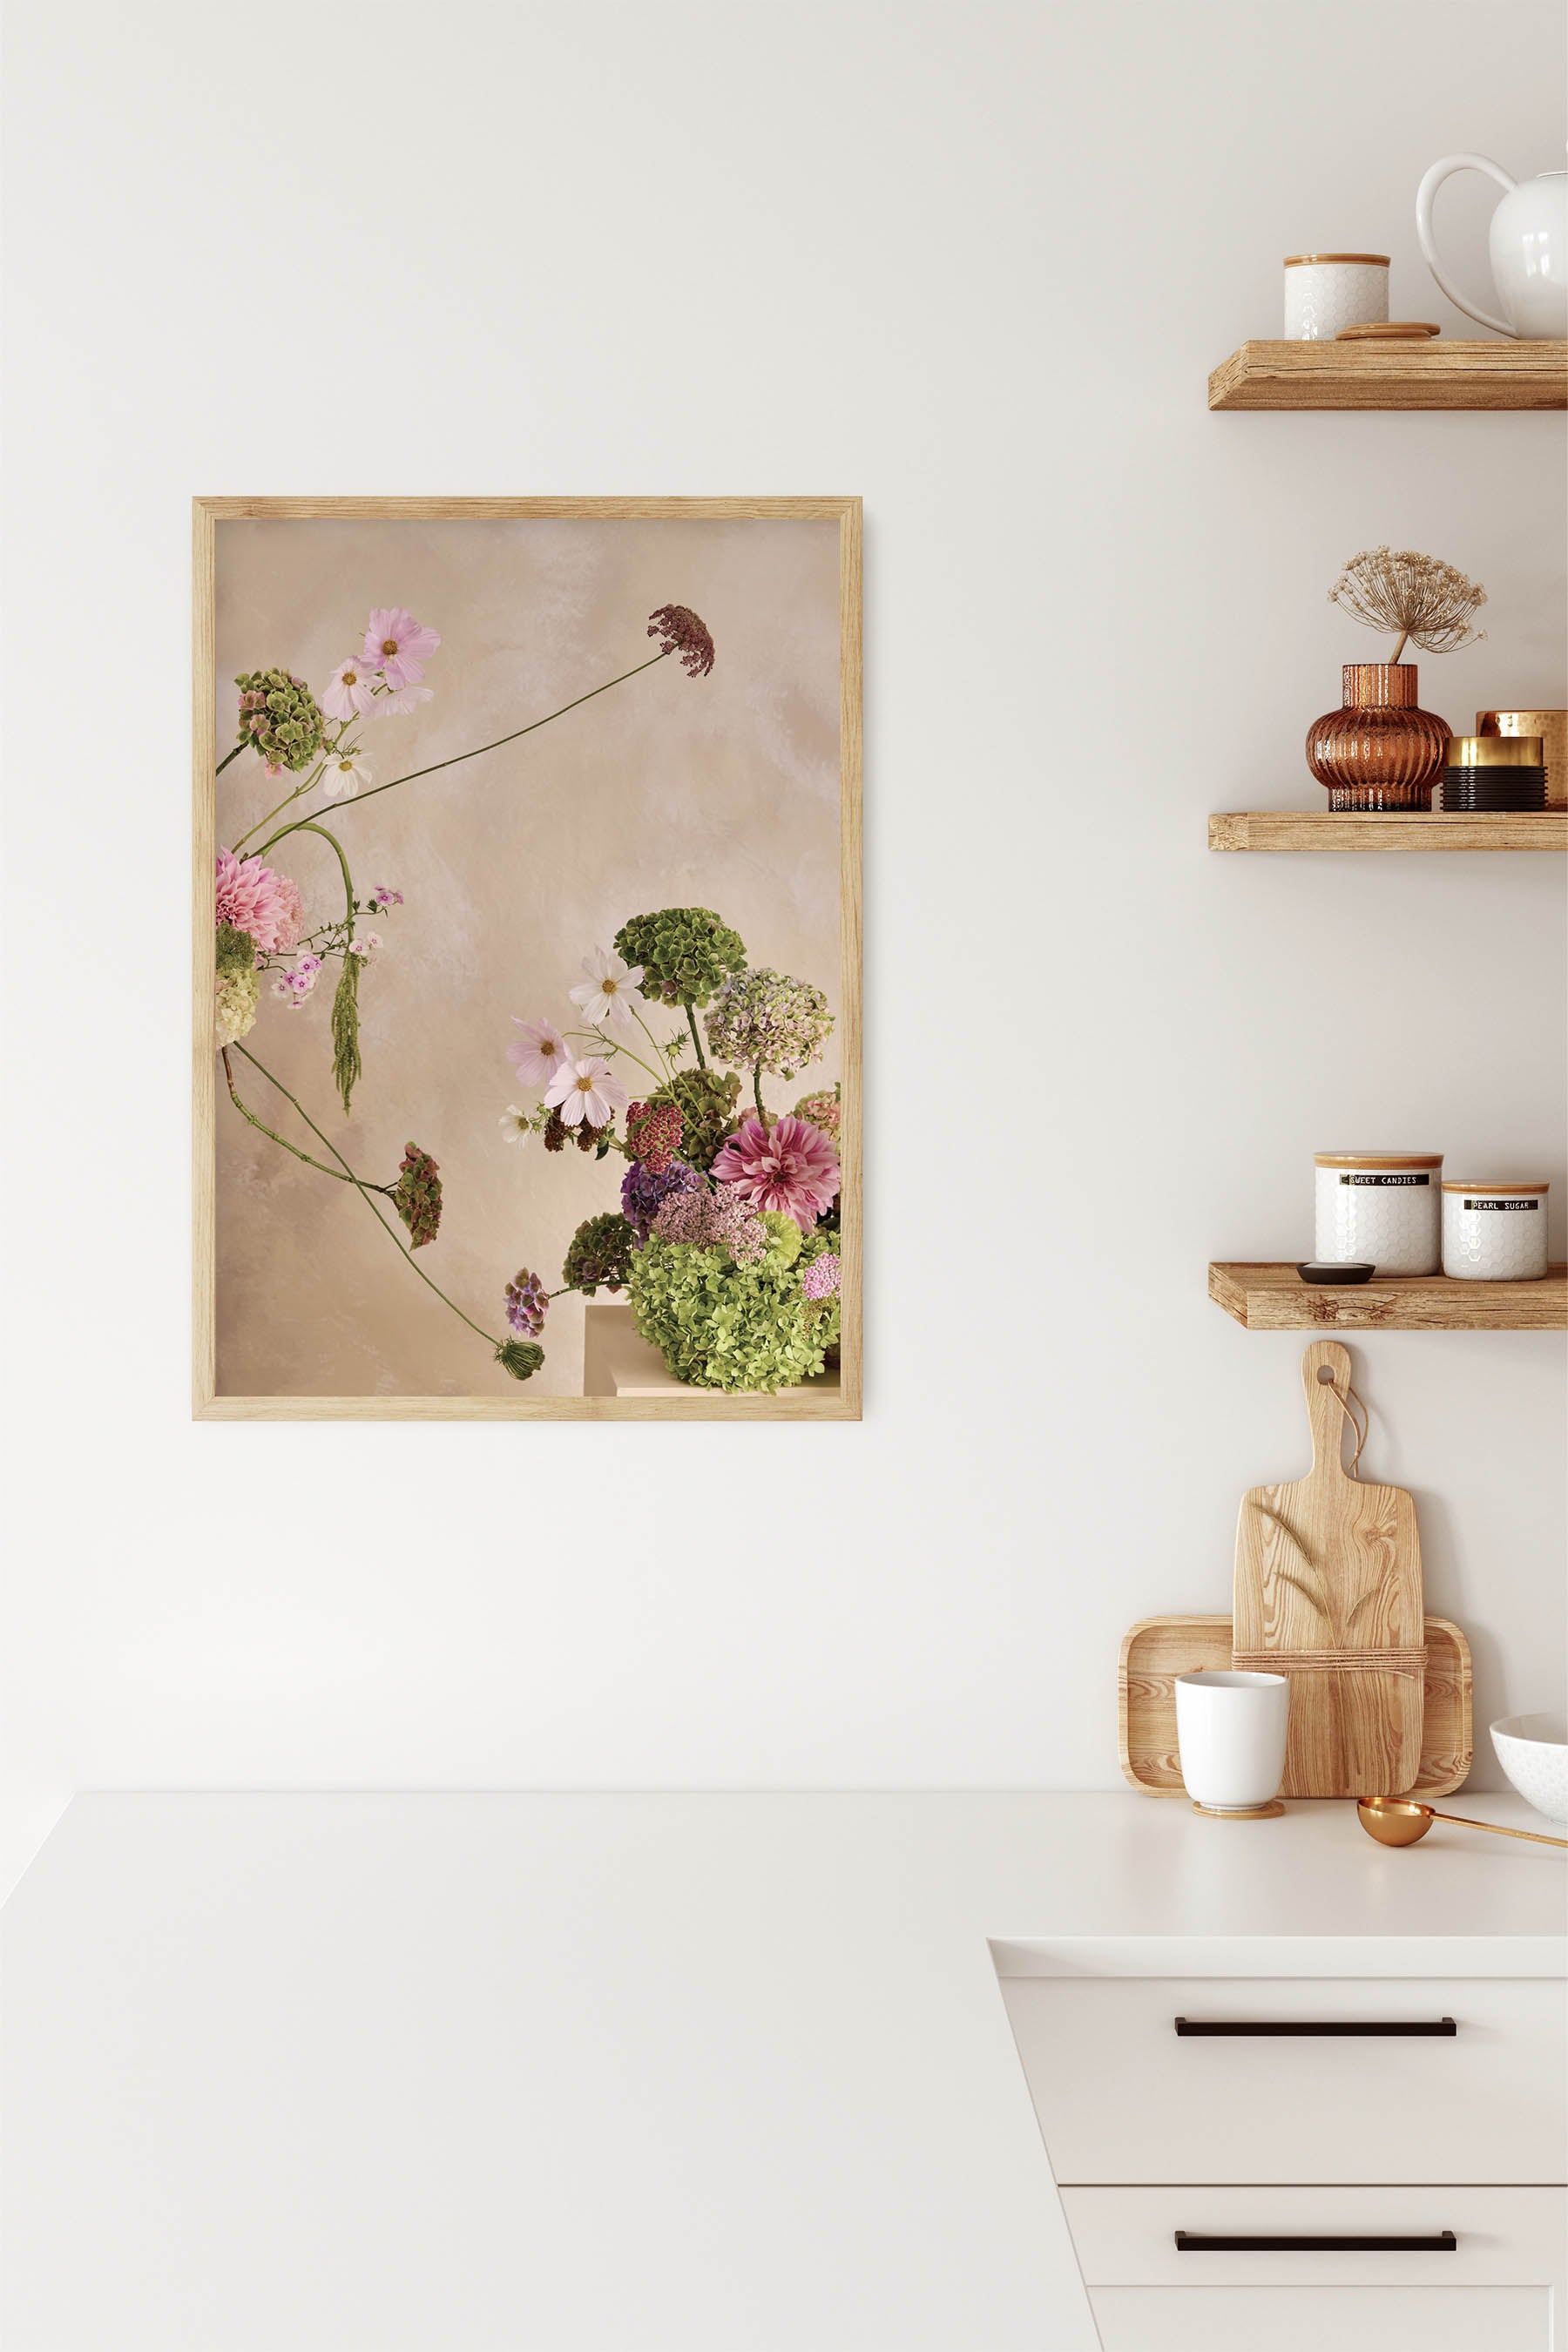 Whimsical Floral Abstract Arrangement against a Linen colour hand painted background Fine Art Print By Austin Bloom A1 size framed in oak no boarder in a  modern white kitchen.